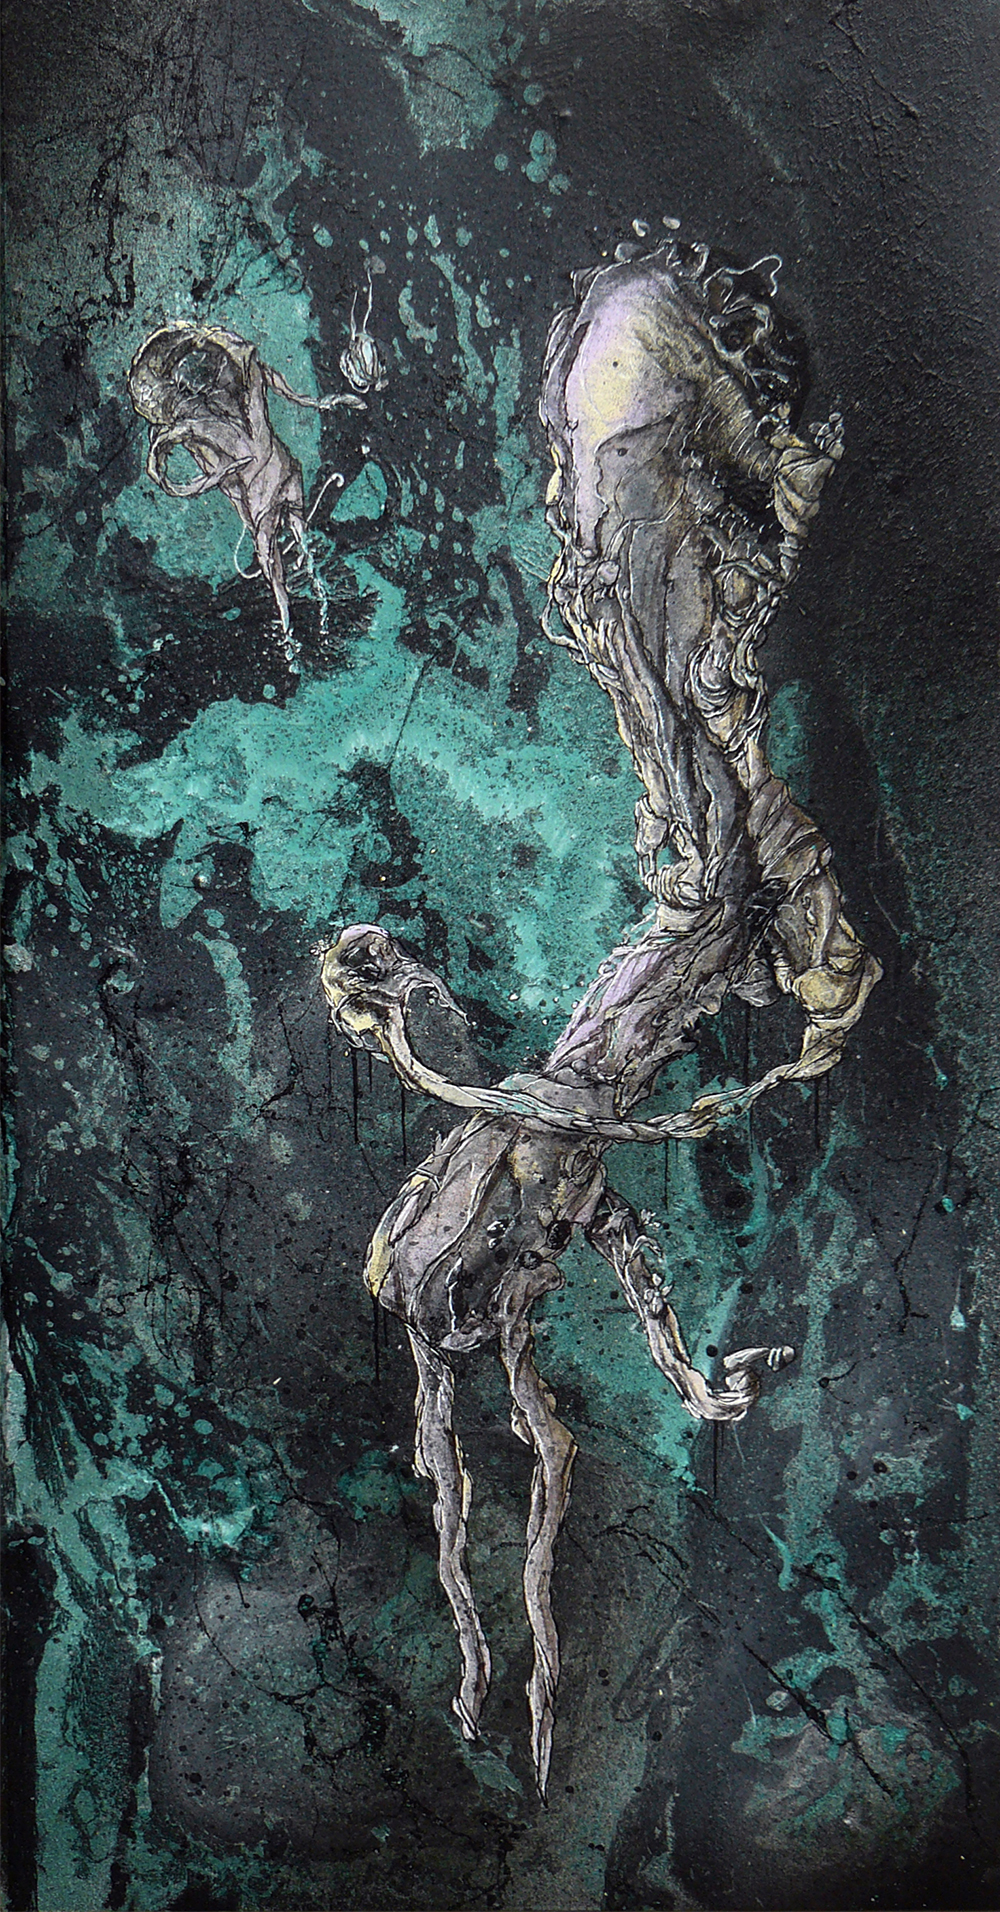 Vernetzt 3000 | Acrylic, acrylic lacquer, india ink on wood | 40x18.8cm | 2011